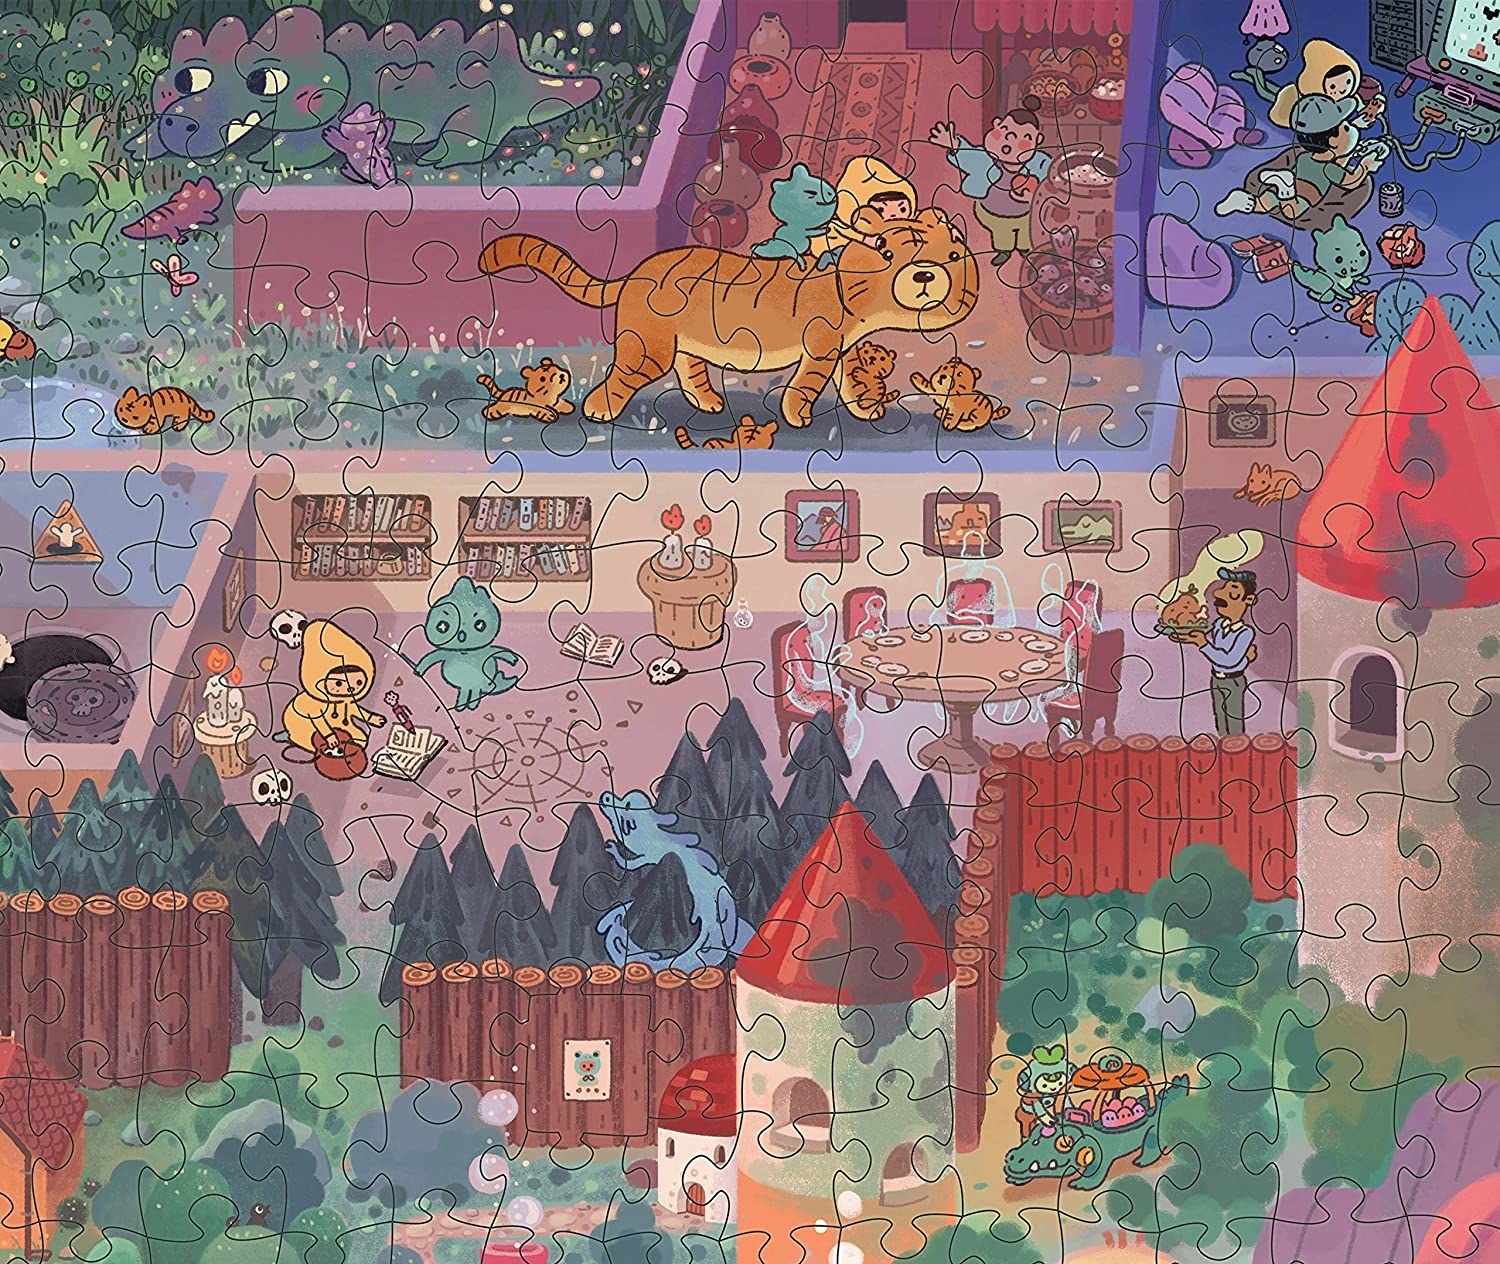 close-up of a section of the puzzle showing its whimsical illustration style